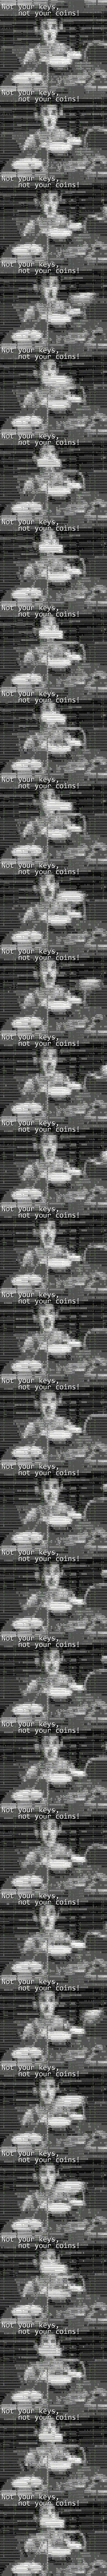 Not your keys, not your coins! #00_12_38